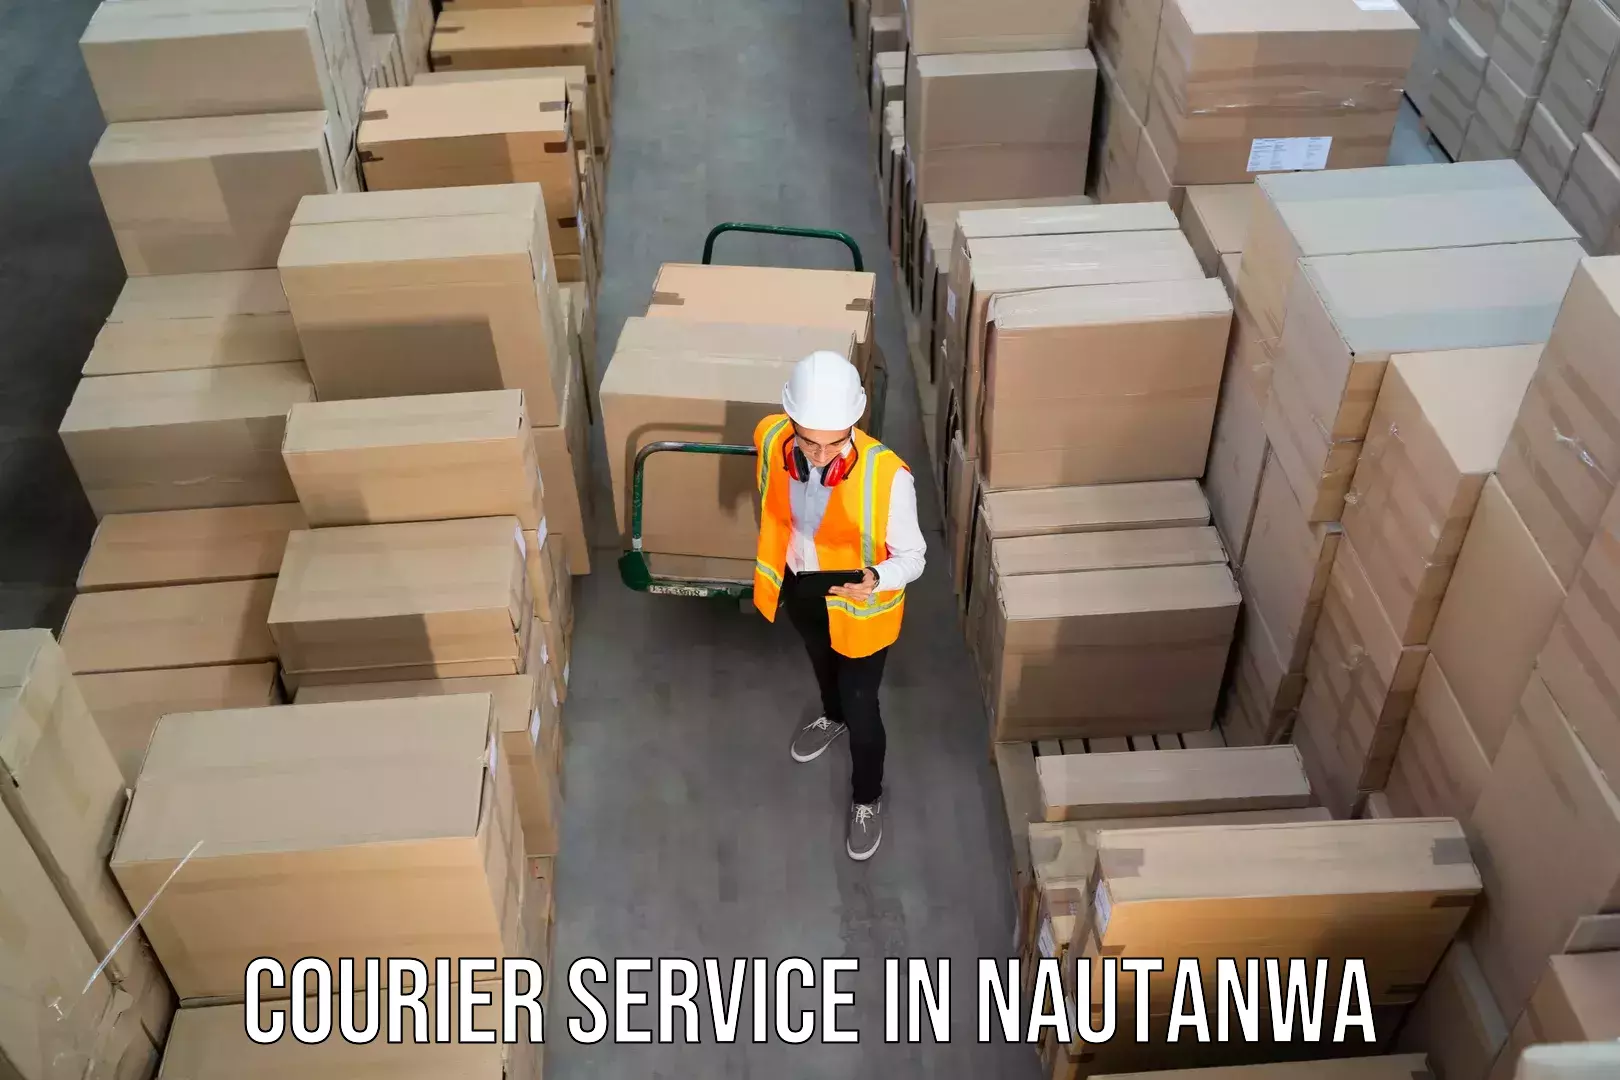 Comprehensive freight services in Nautanwa